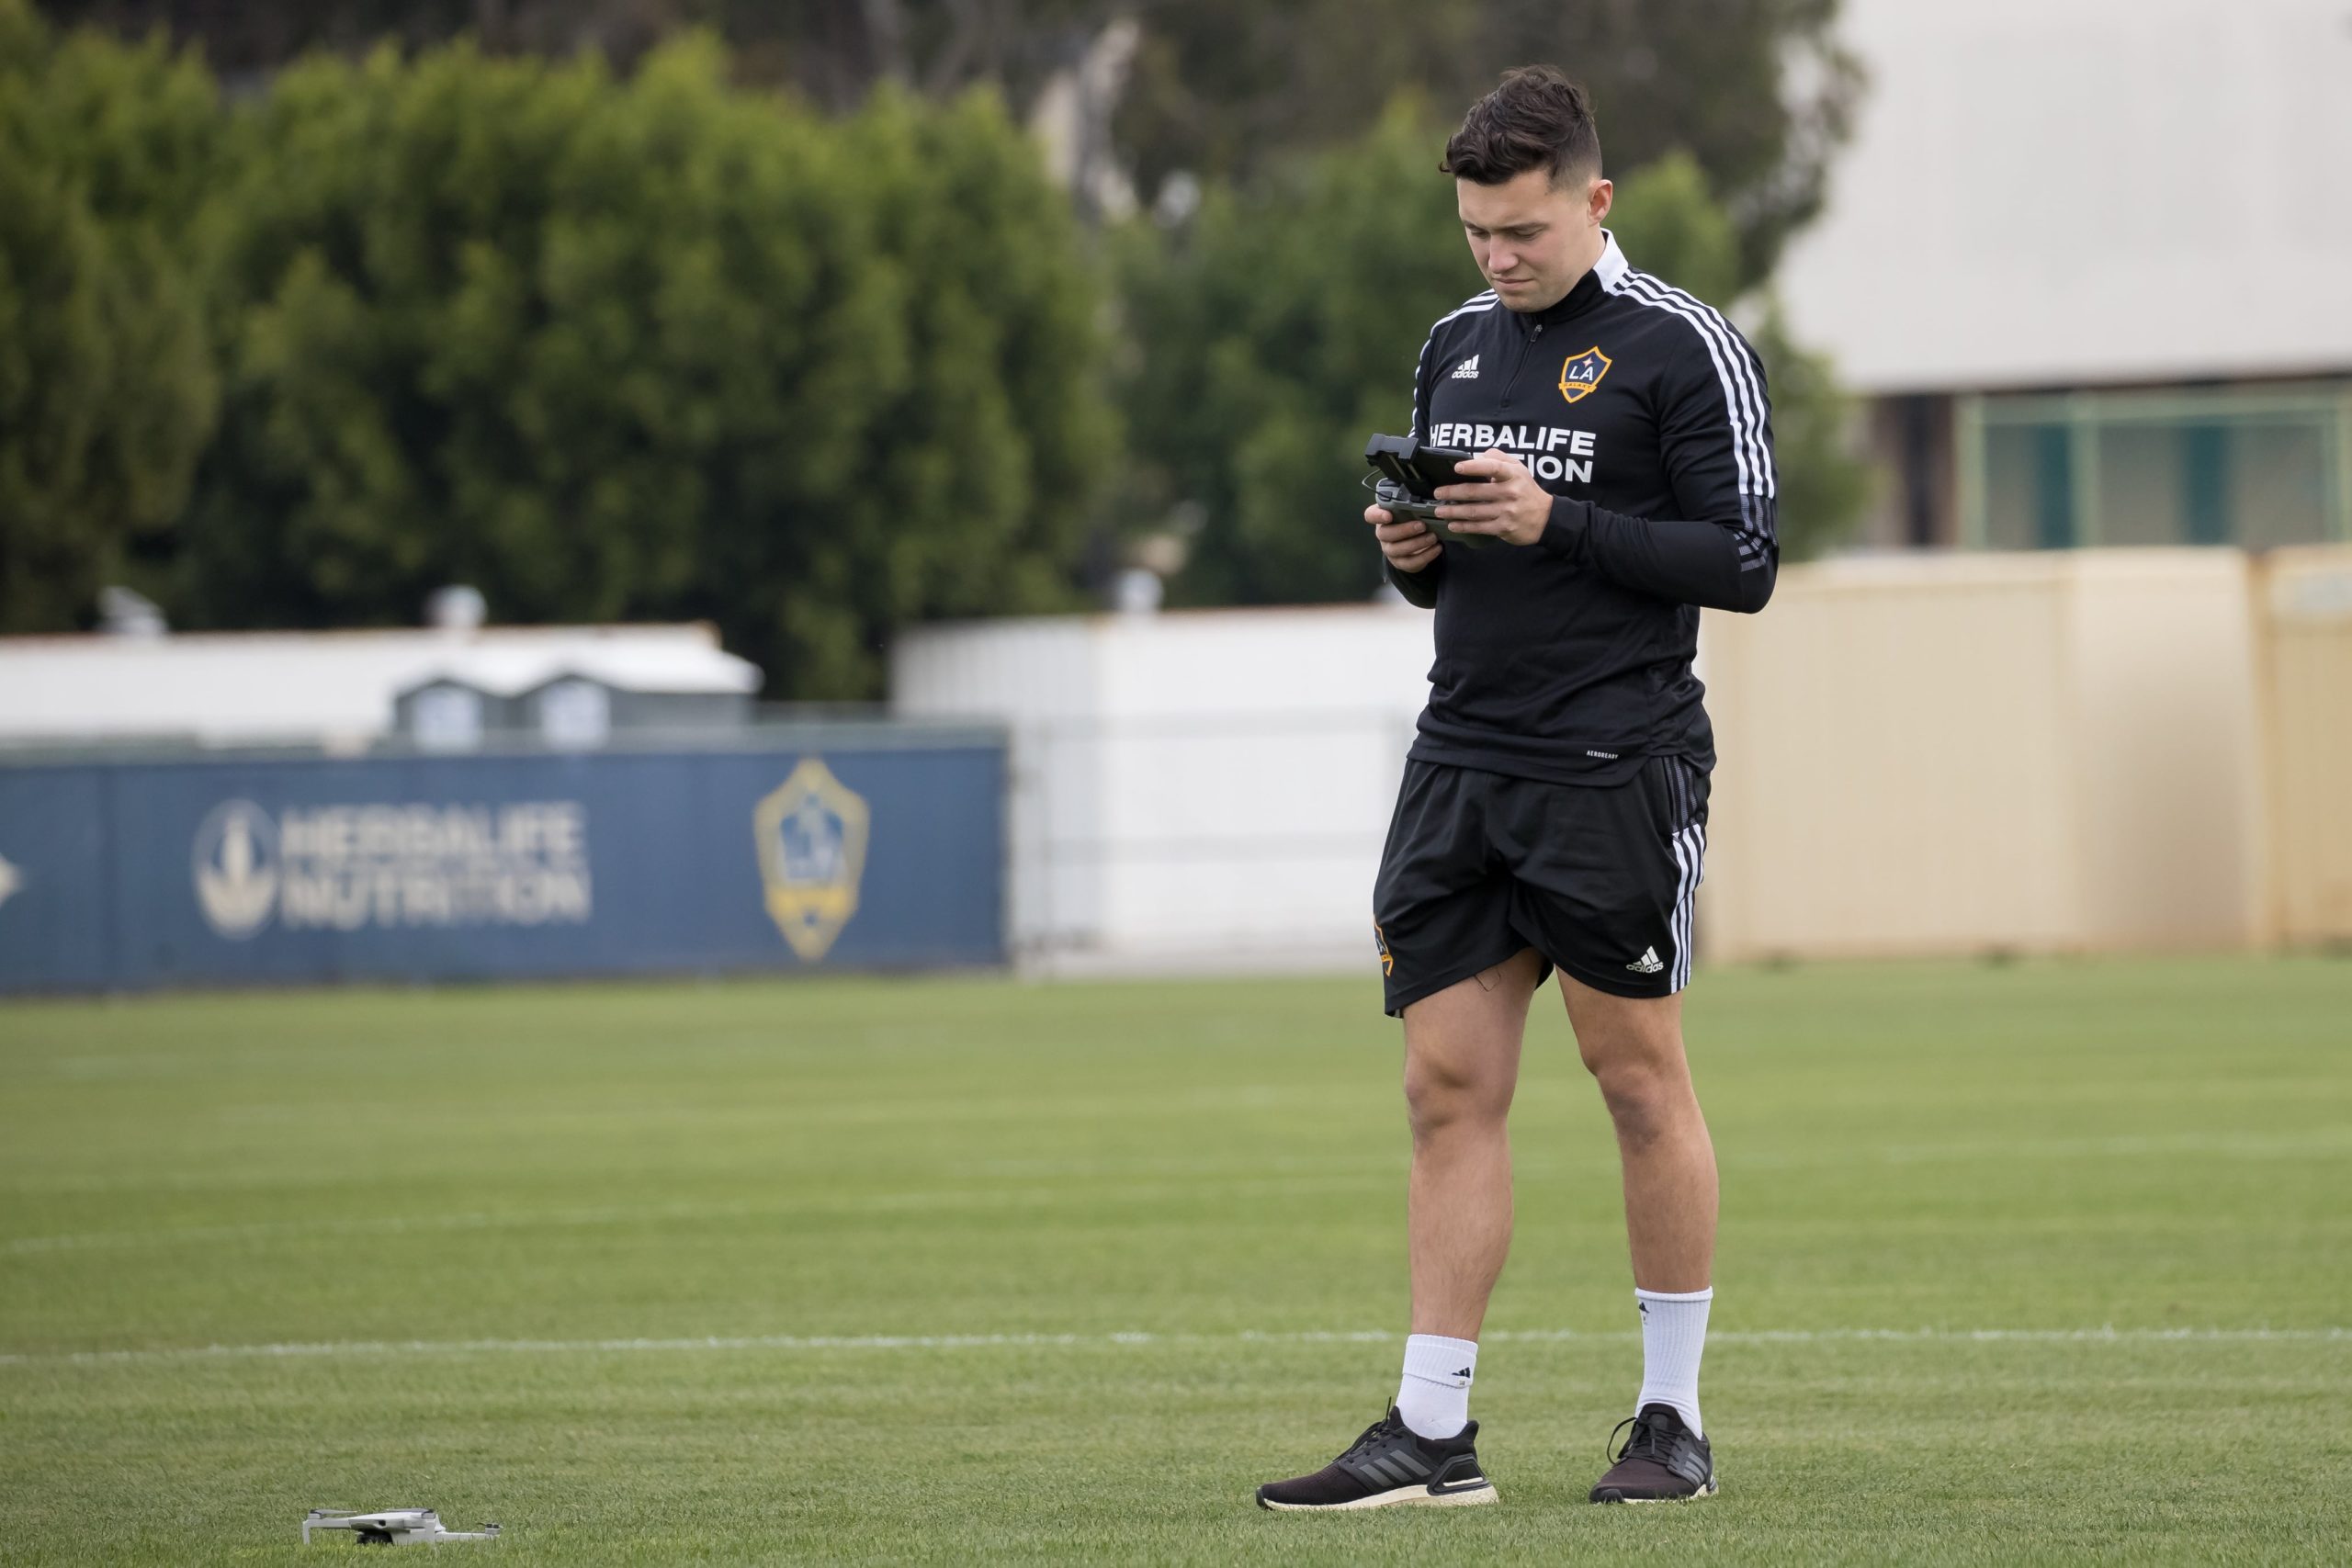 StatsBomb Data Diaries: Sam Green, Assistant Coach & Director of Video Analysis at LA Galaxy